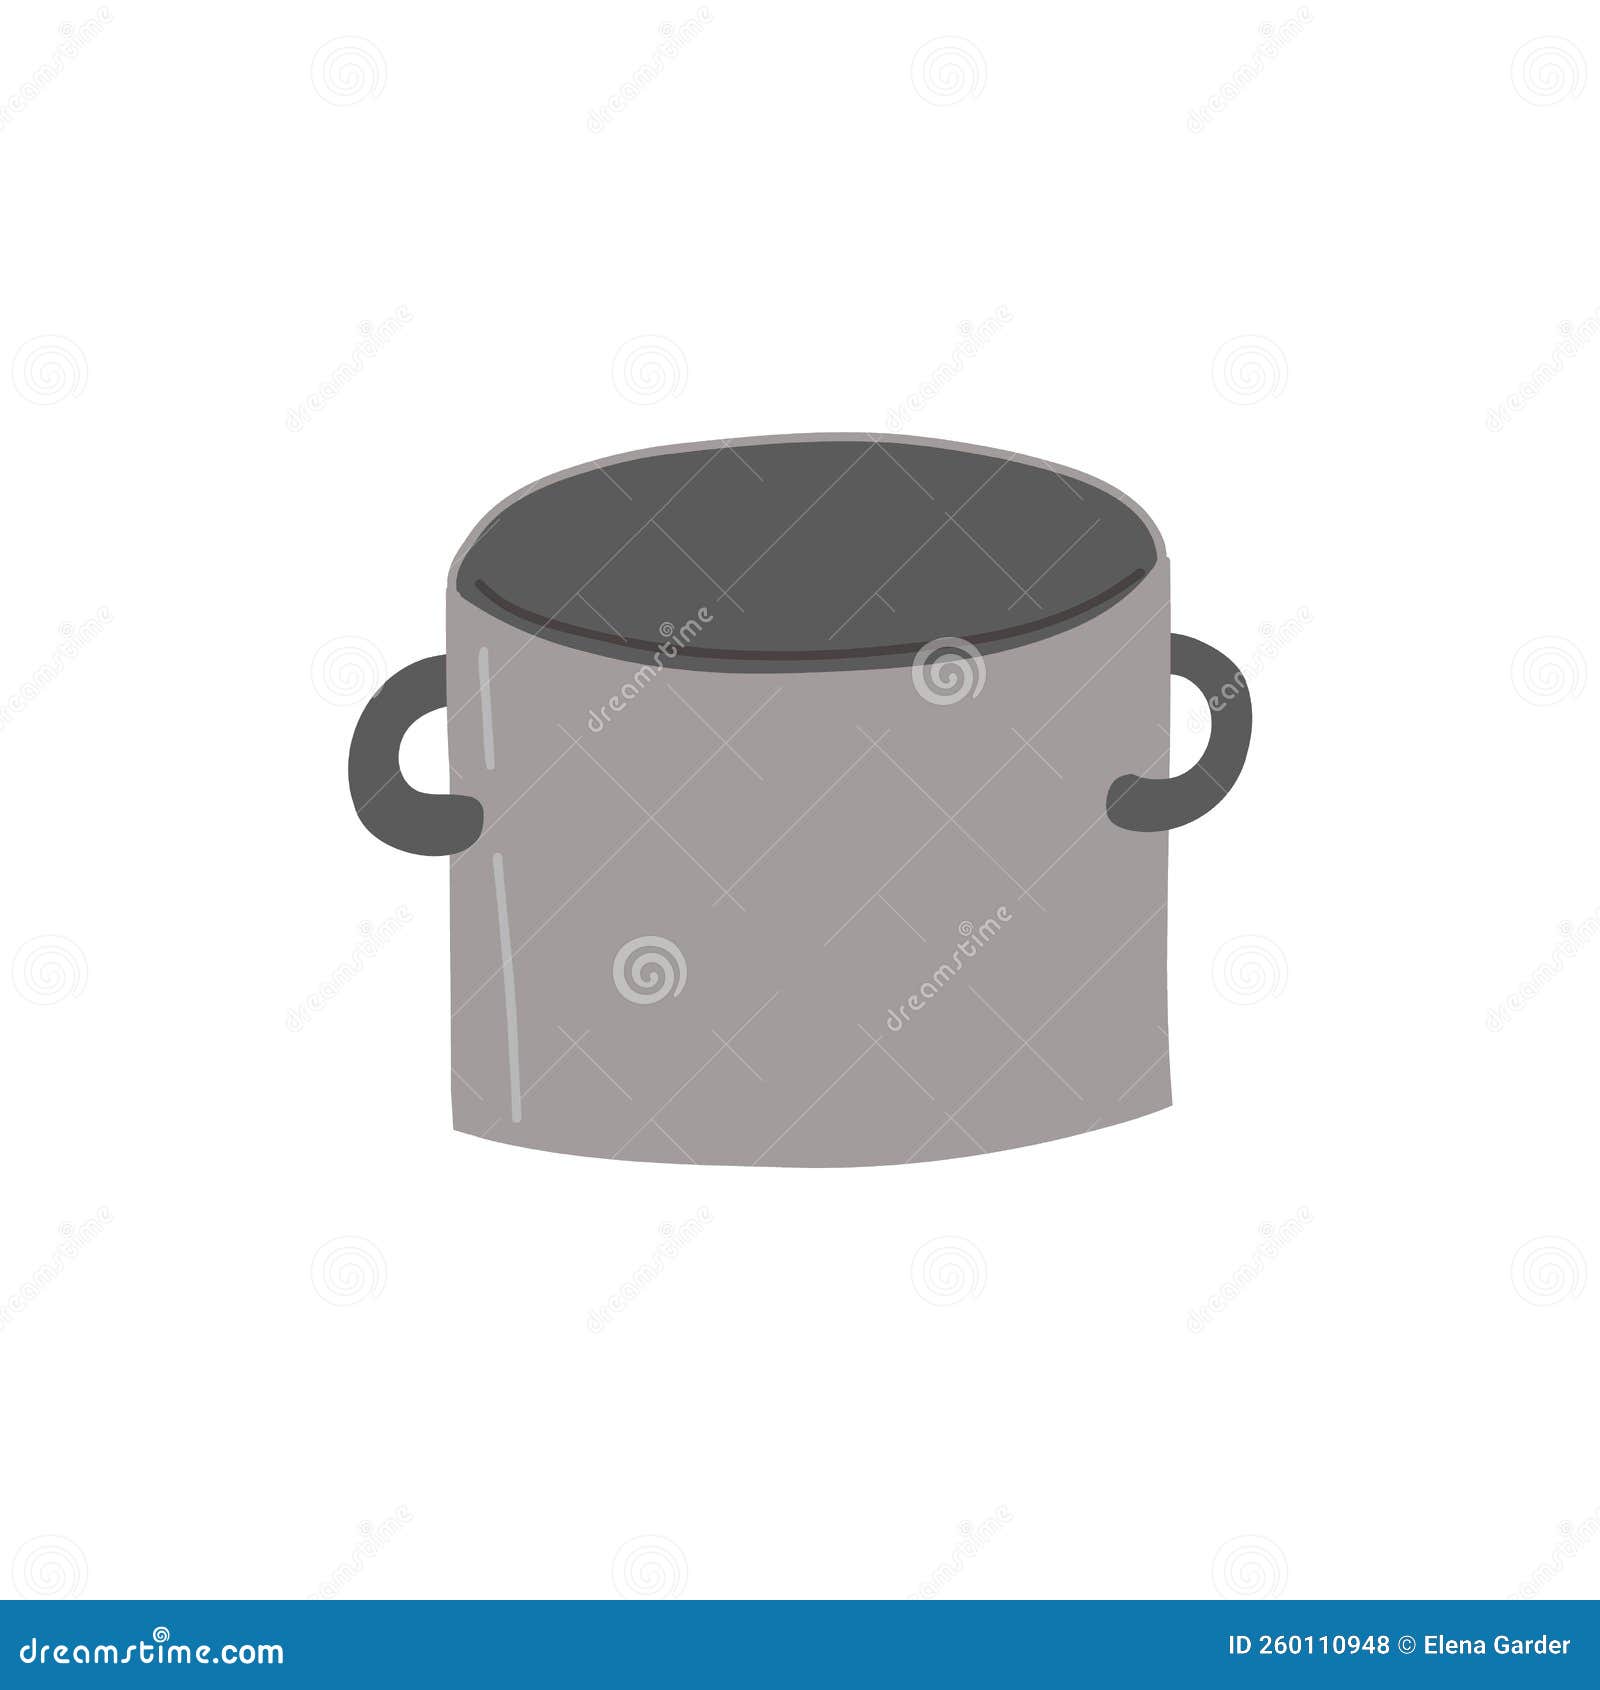 Funny Kitchen Signs Stock Illustrations – 59 Funny Kitchen Signs Stock  Illustrations, Vectors & Clipart - Dreamstime